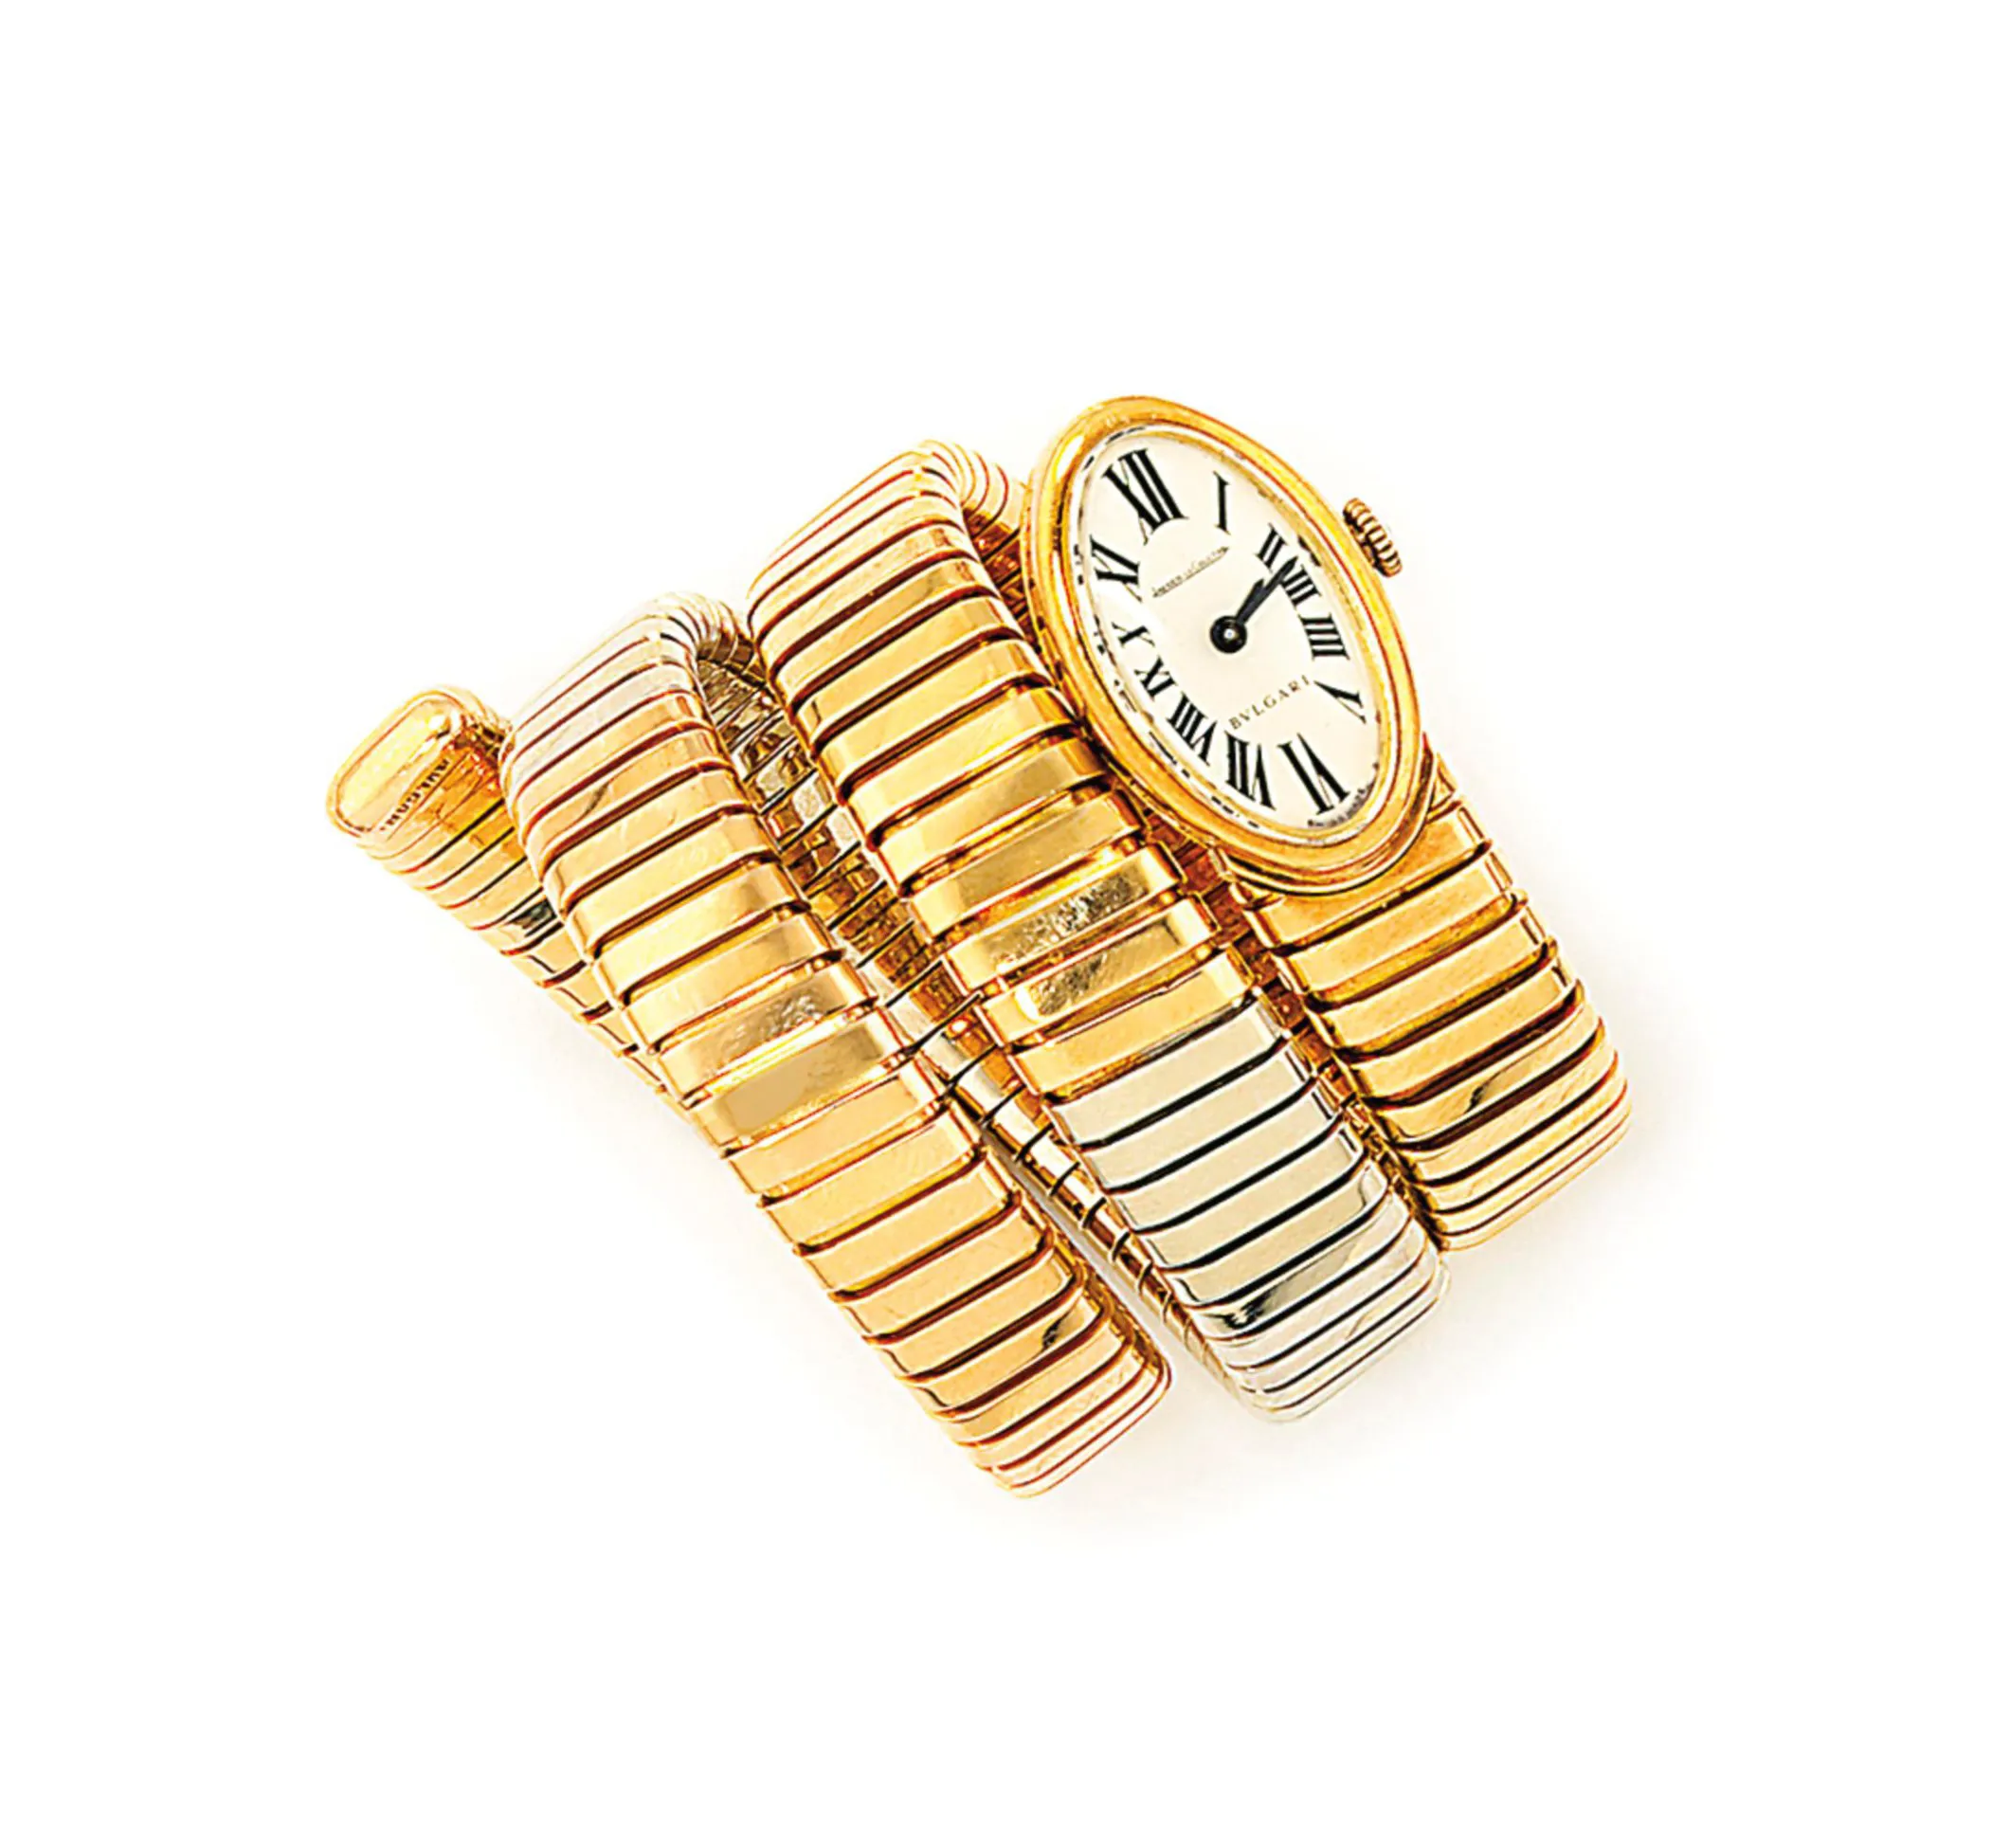 Jaeger-LeCoultre Tubogas 14mm Yellow gold White